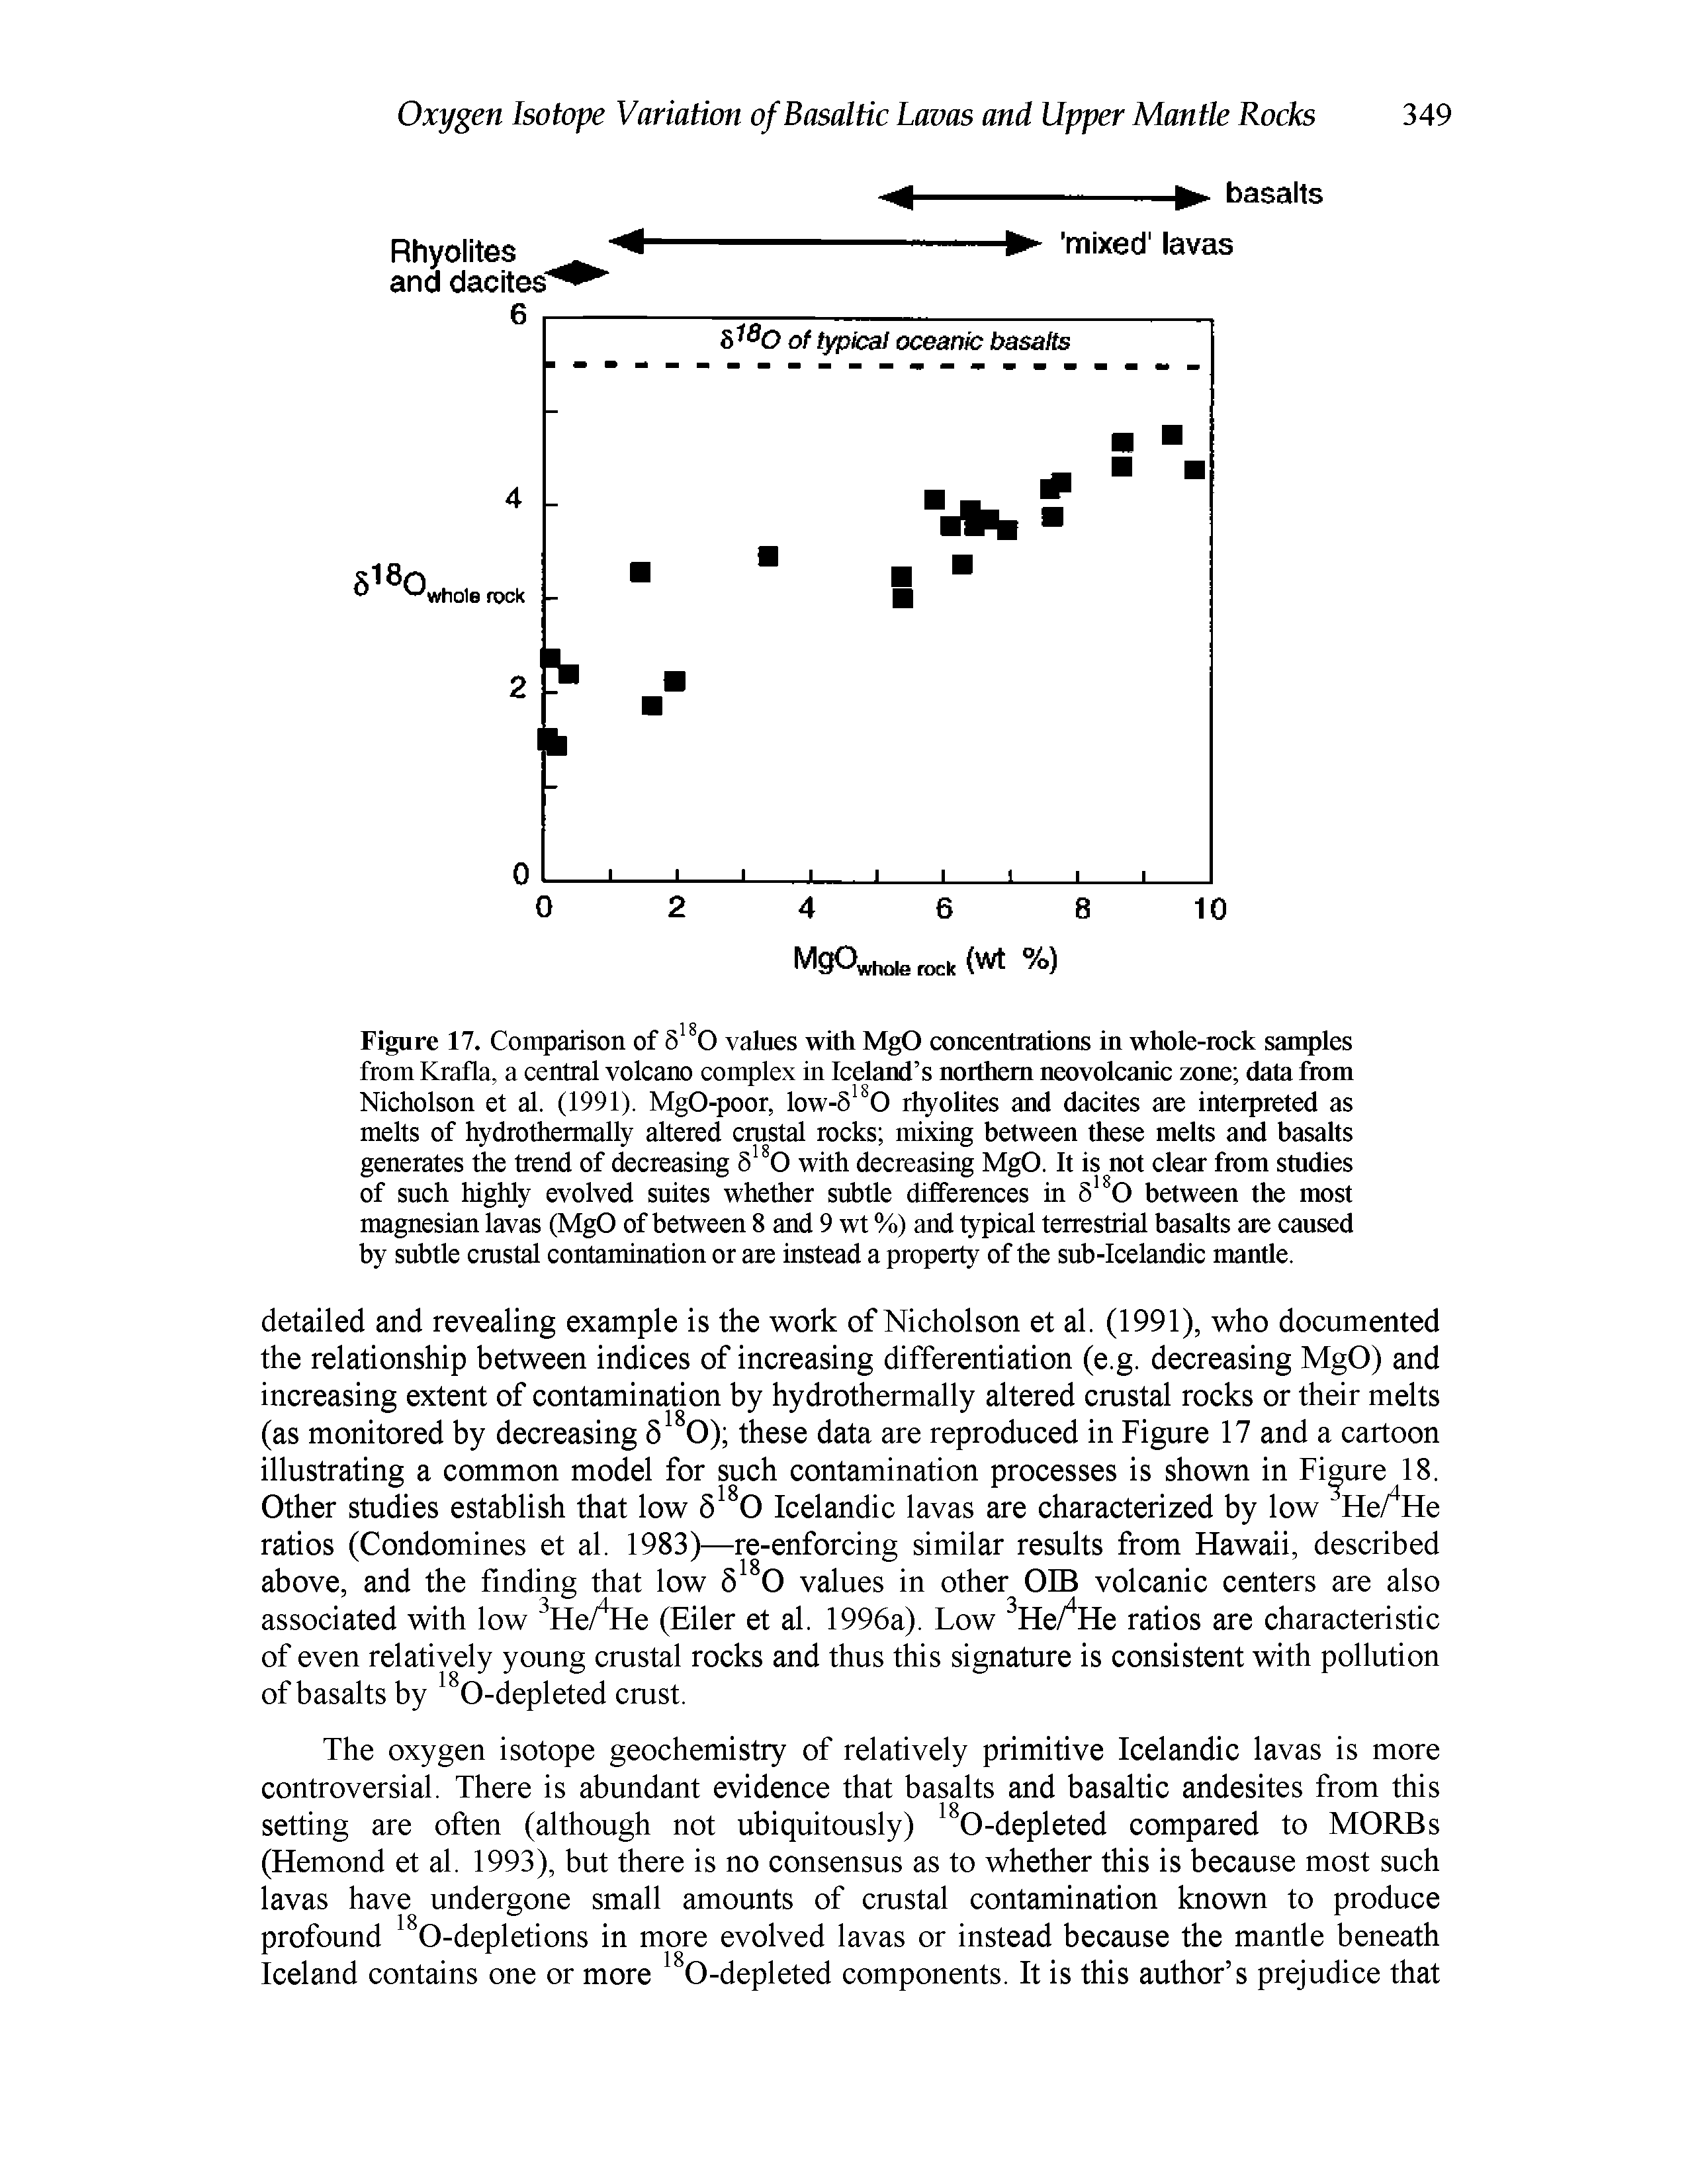 Figure 17. Comparison of 5 O values with MgO concentrations in whole-rock samples from Krafla, a central volcano complex in Iceland s northern neovolcanic zone data from Nicholson et al. (1991). MgO-poor, low-5 0 rhyolites and dacites are interpreted as melts of hydrothermally altered crustal rocks mixing between these melts and basalts generates the trend of decreasing 5 0 with decreasing MgO. It is not clear from studies of such highly evolved suites whether subtle differences in between the most magnesian lavas (MgO of between 8 and 9 wt %) and typical terrestrial basalts are caused by subtle crustal contamination or are instead a property of the sub-Icelandic mantle.